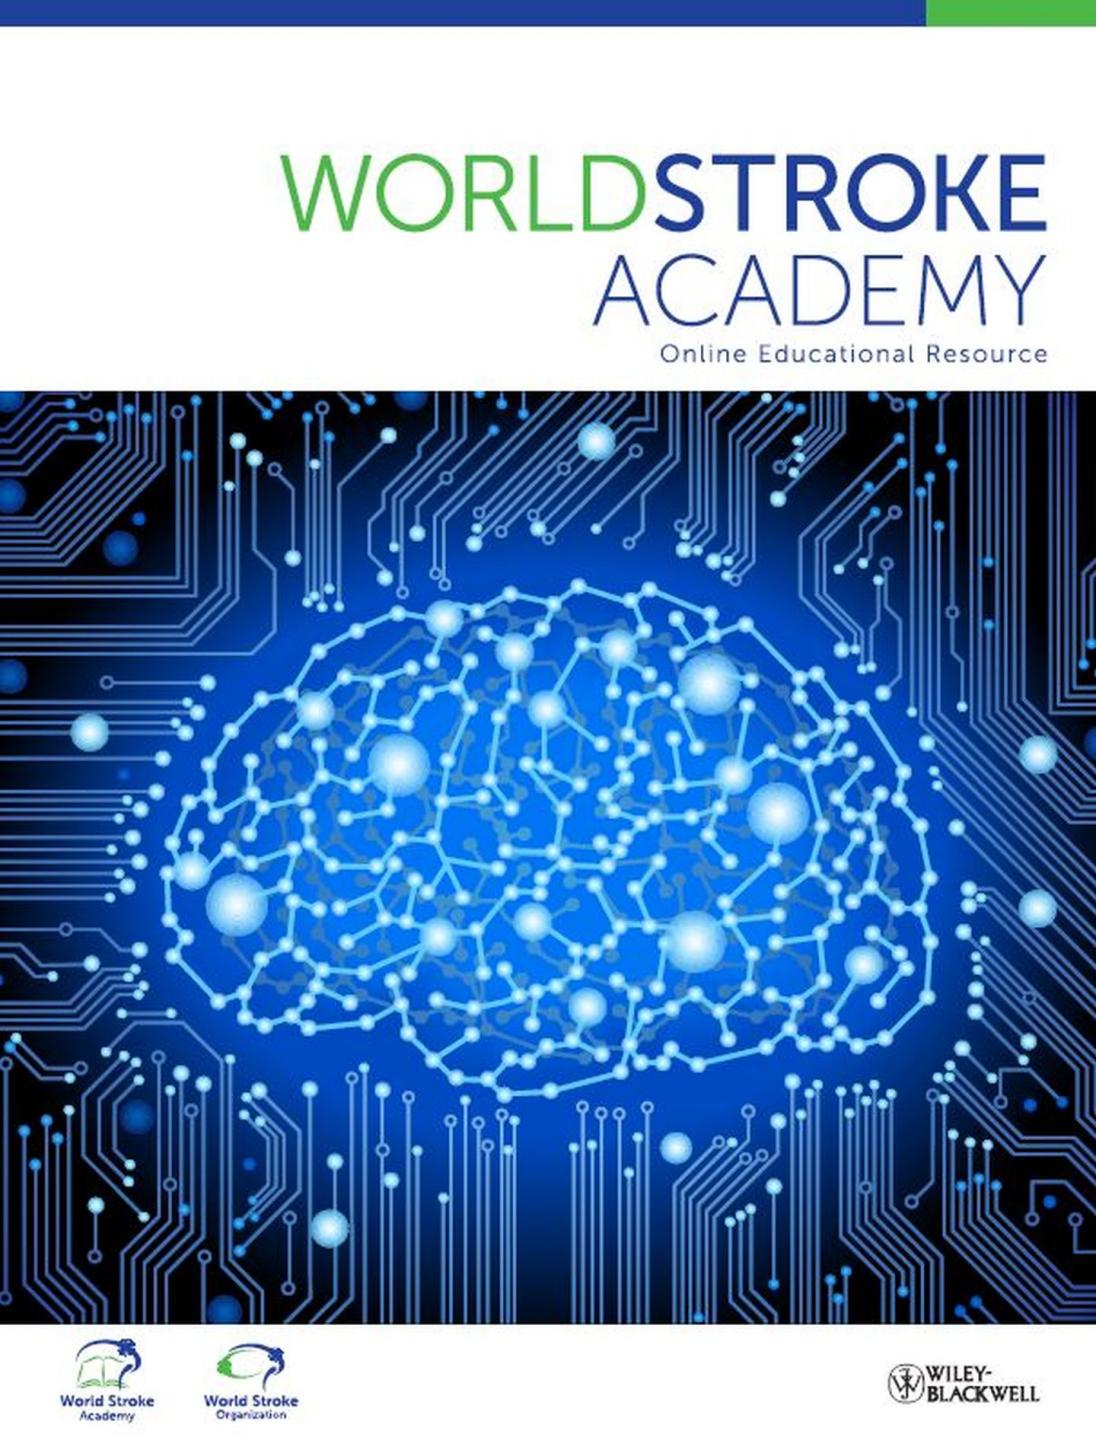 World Stroke Academy, Exercise After Stroke - Making the Most of It